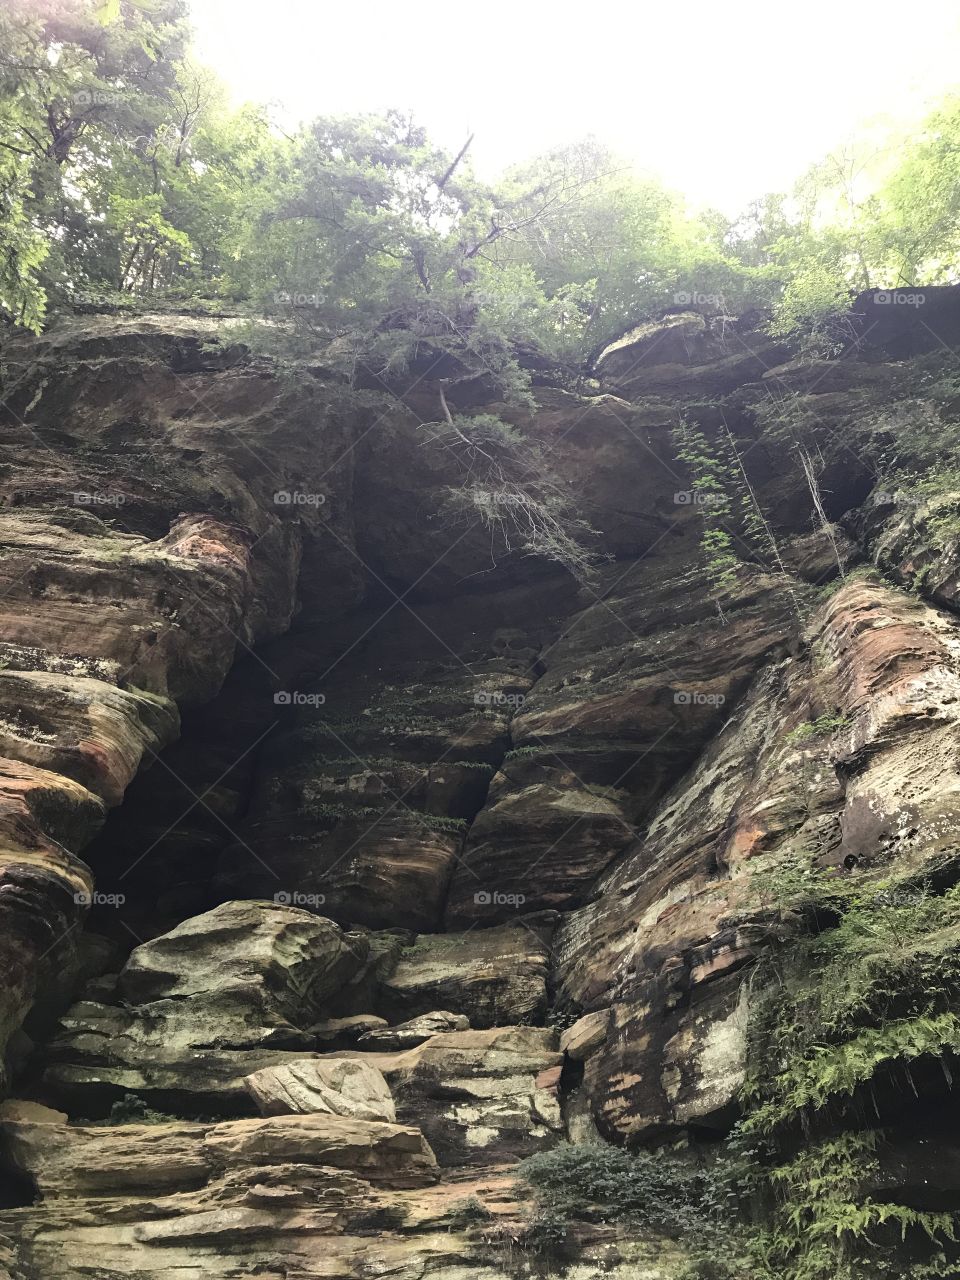 Rock House in the Hocking Hills